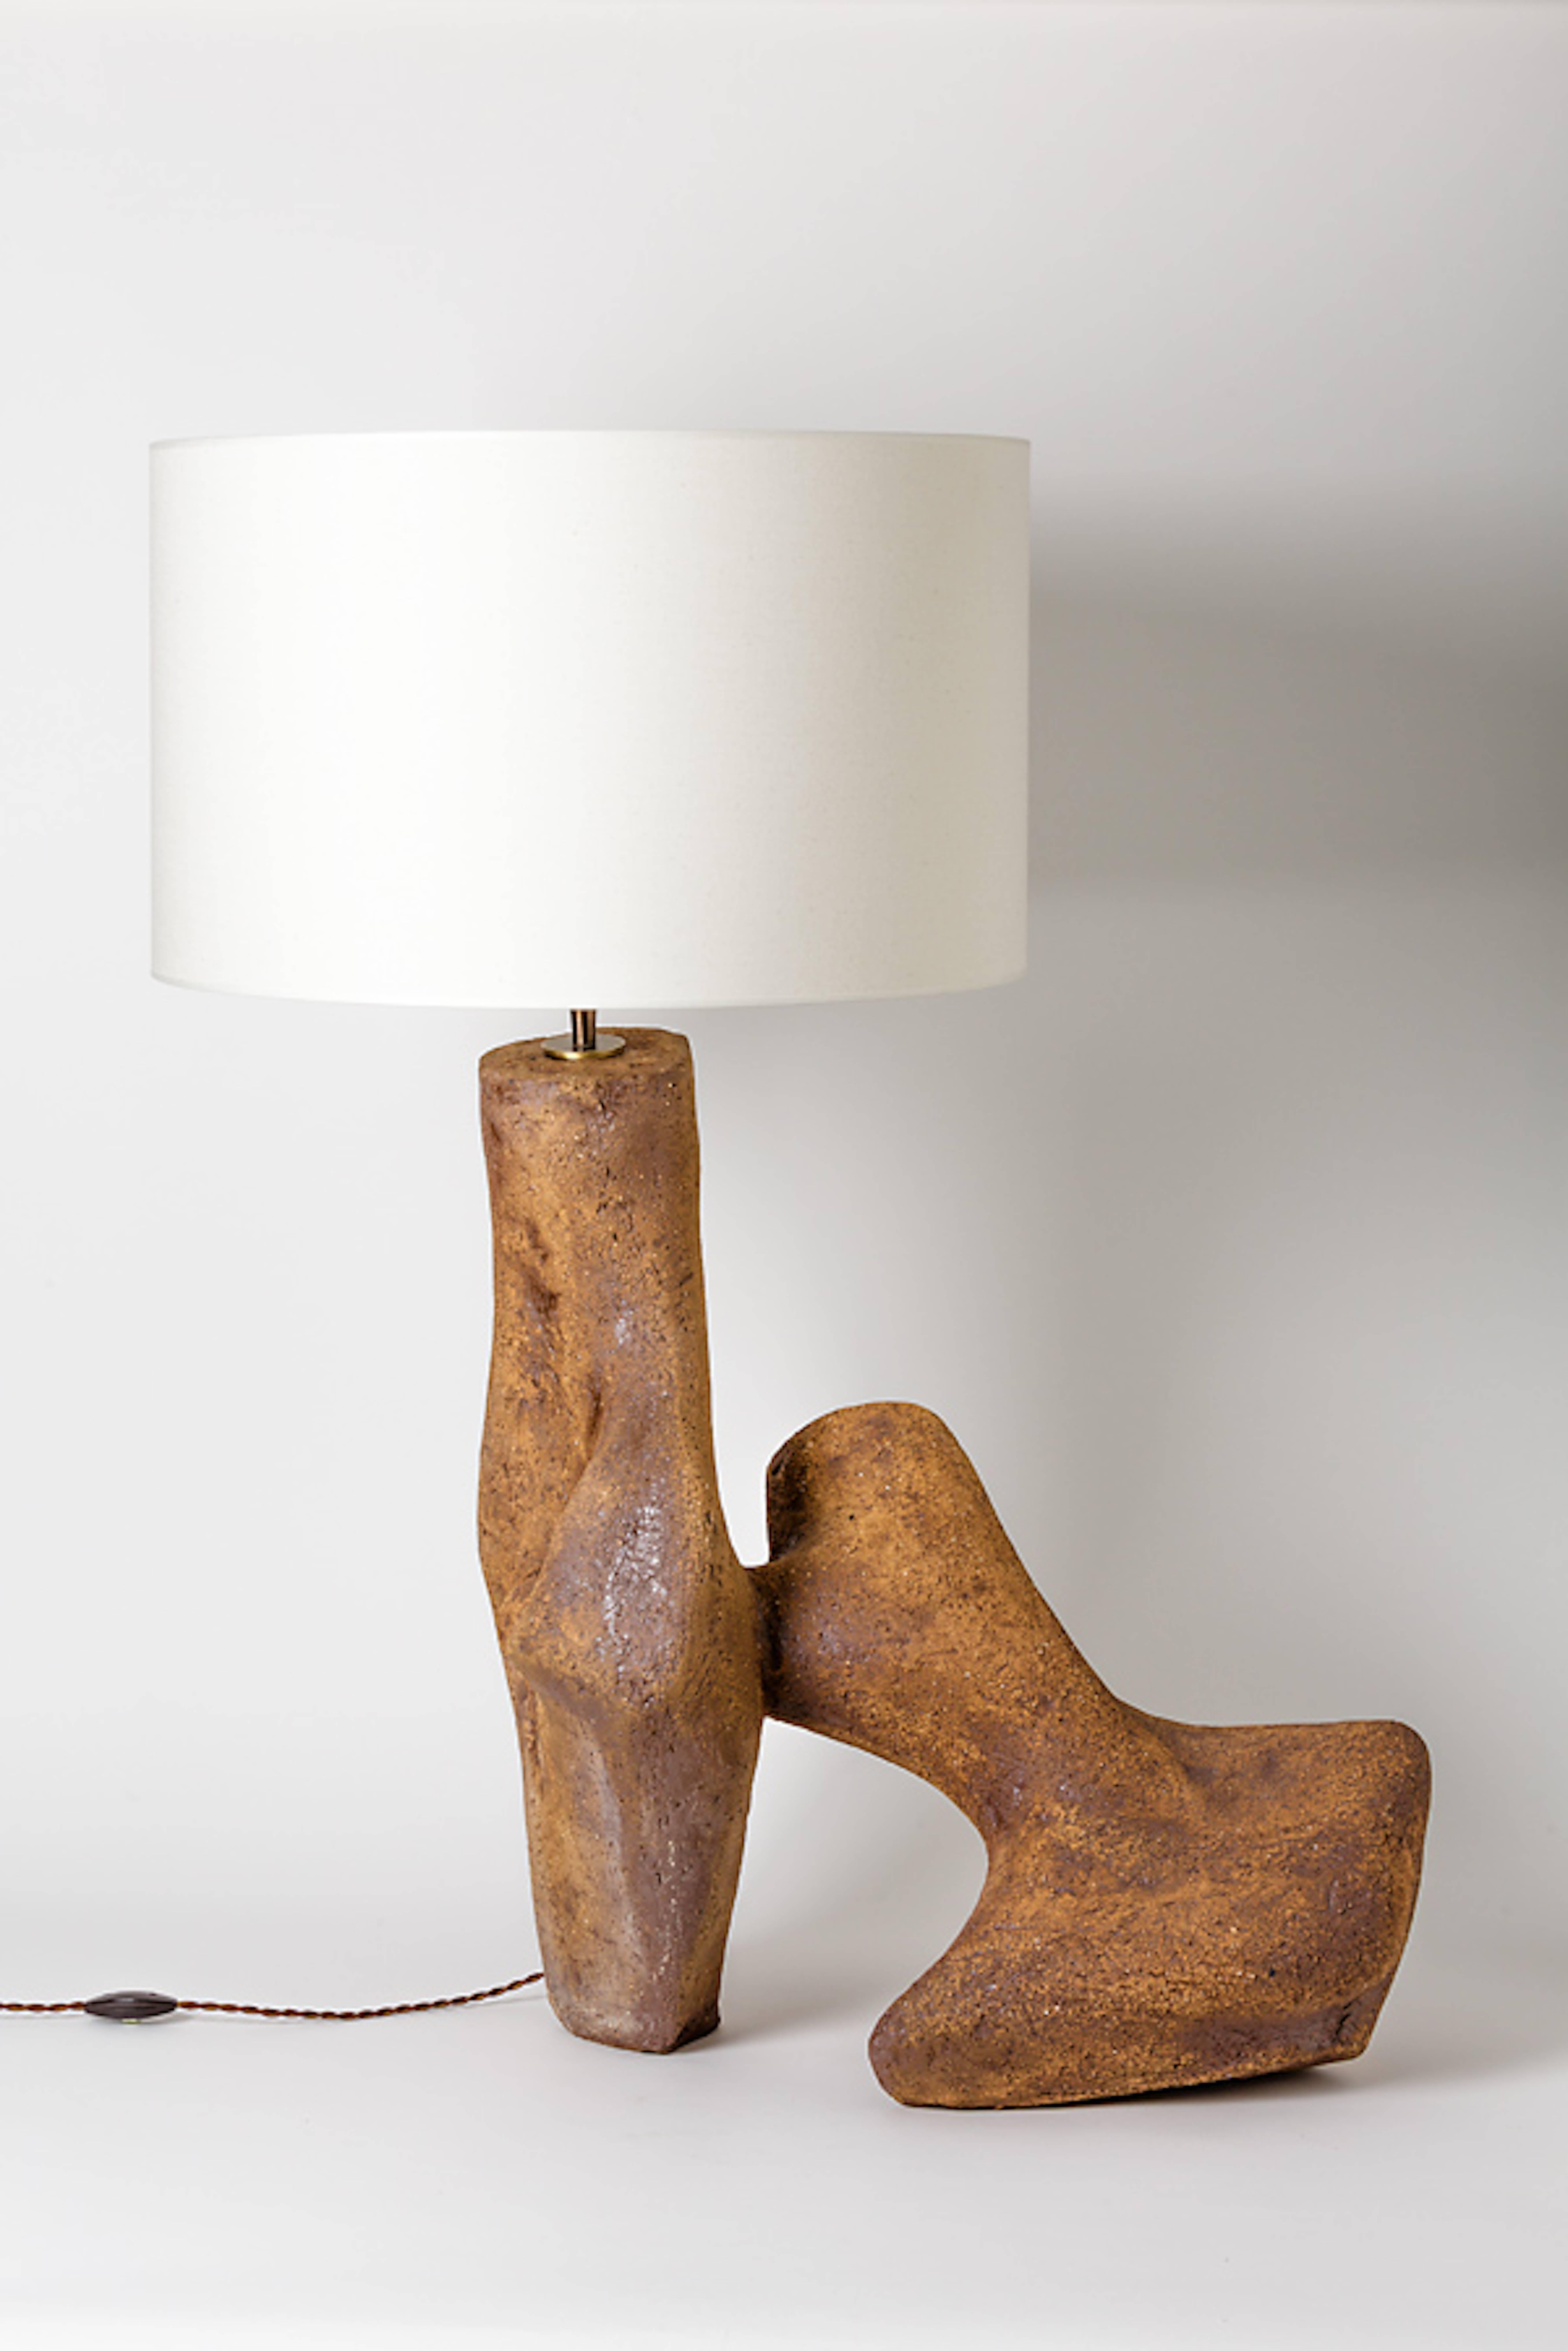 An exceptional and important ceramic lamp by Tim Orr.
Signed at the base.
Unique piece.
Sold with new electrical system and lampshade,
circa 1970.

Height with lampshade: 36' inch.
Height without lampshade: 27'1/2 inch.
Height without